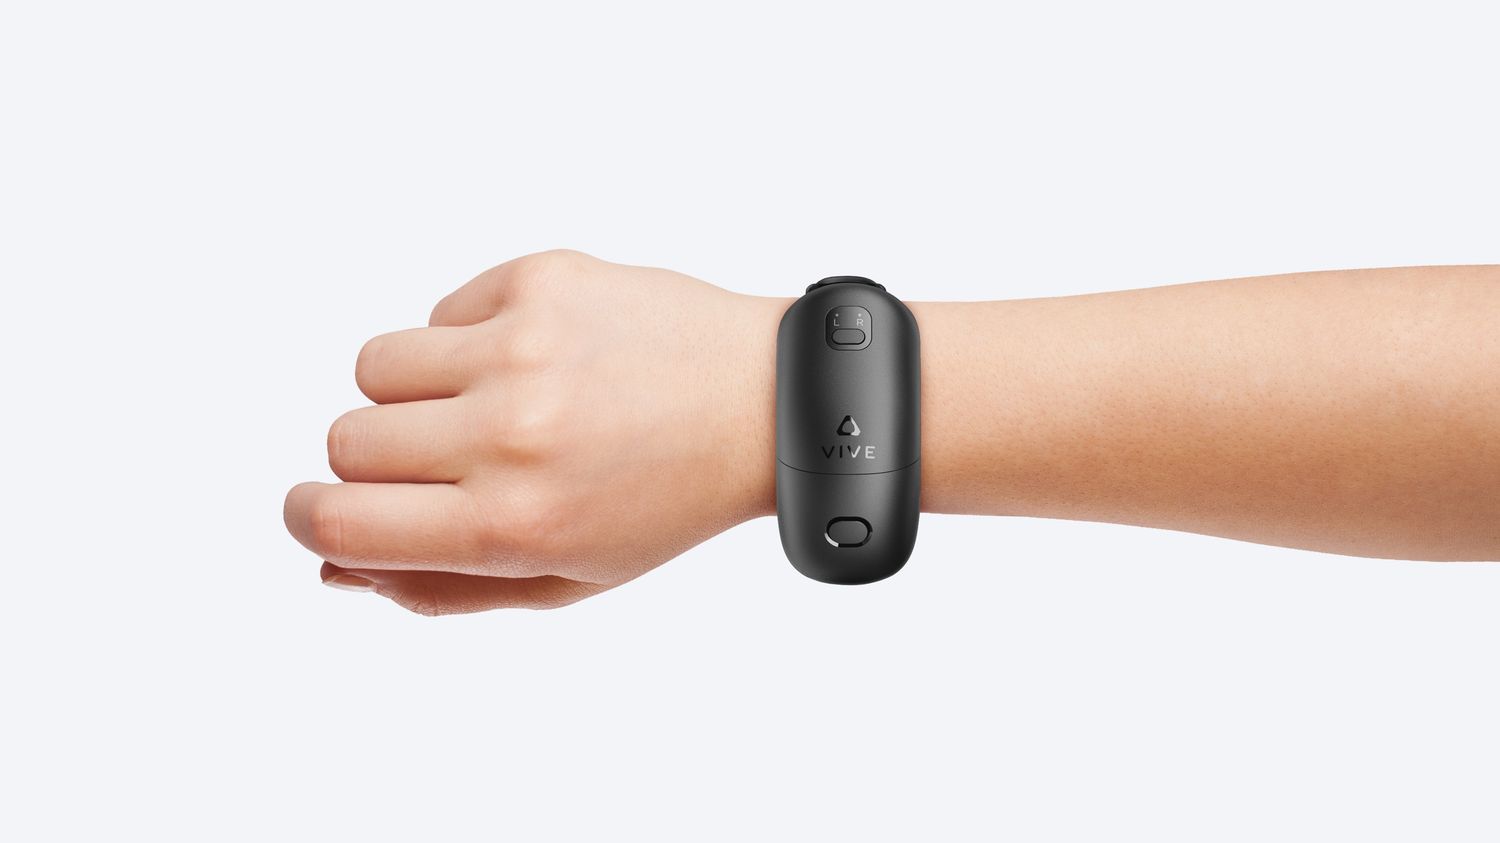 htcs-new-vive-wrist-tracker-promises-accurate-vr-tracking